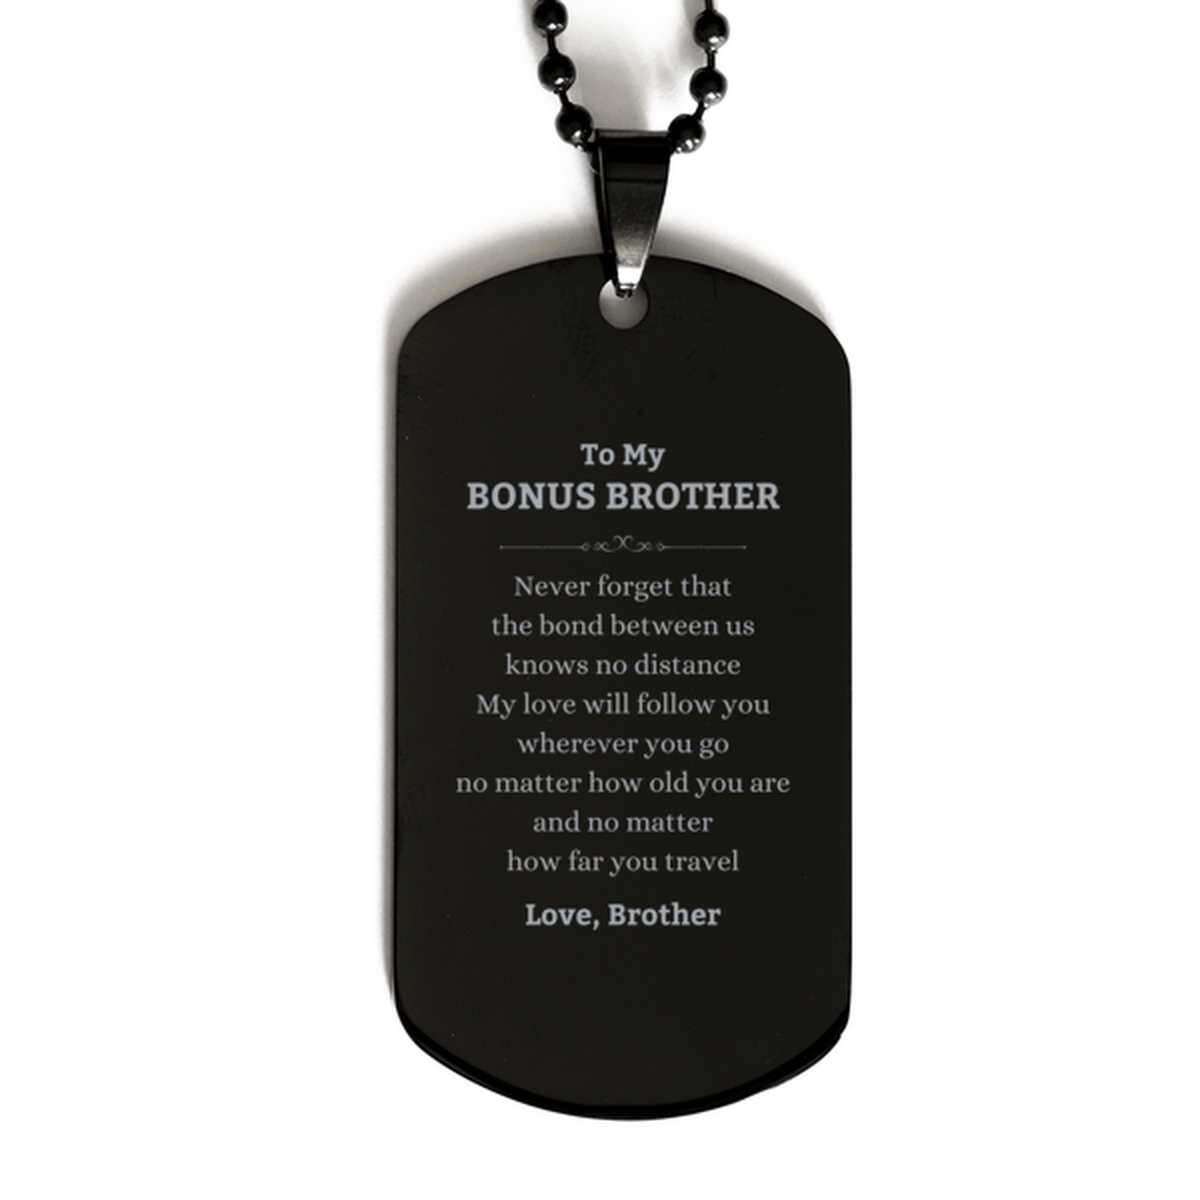 Bonus Brother Birthday Gifts from Brother, Adjustable Black Dog Tag for Bonus Brother Christmas Graduation Unique Gifts Bonus Brother Never forget that the bond between us knows no distance. Love, Brother